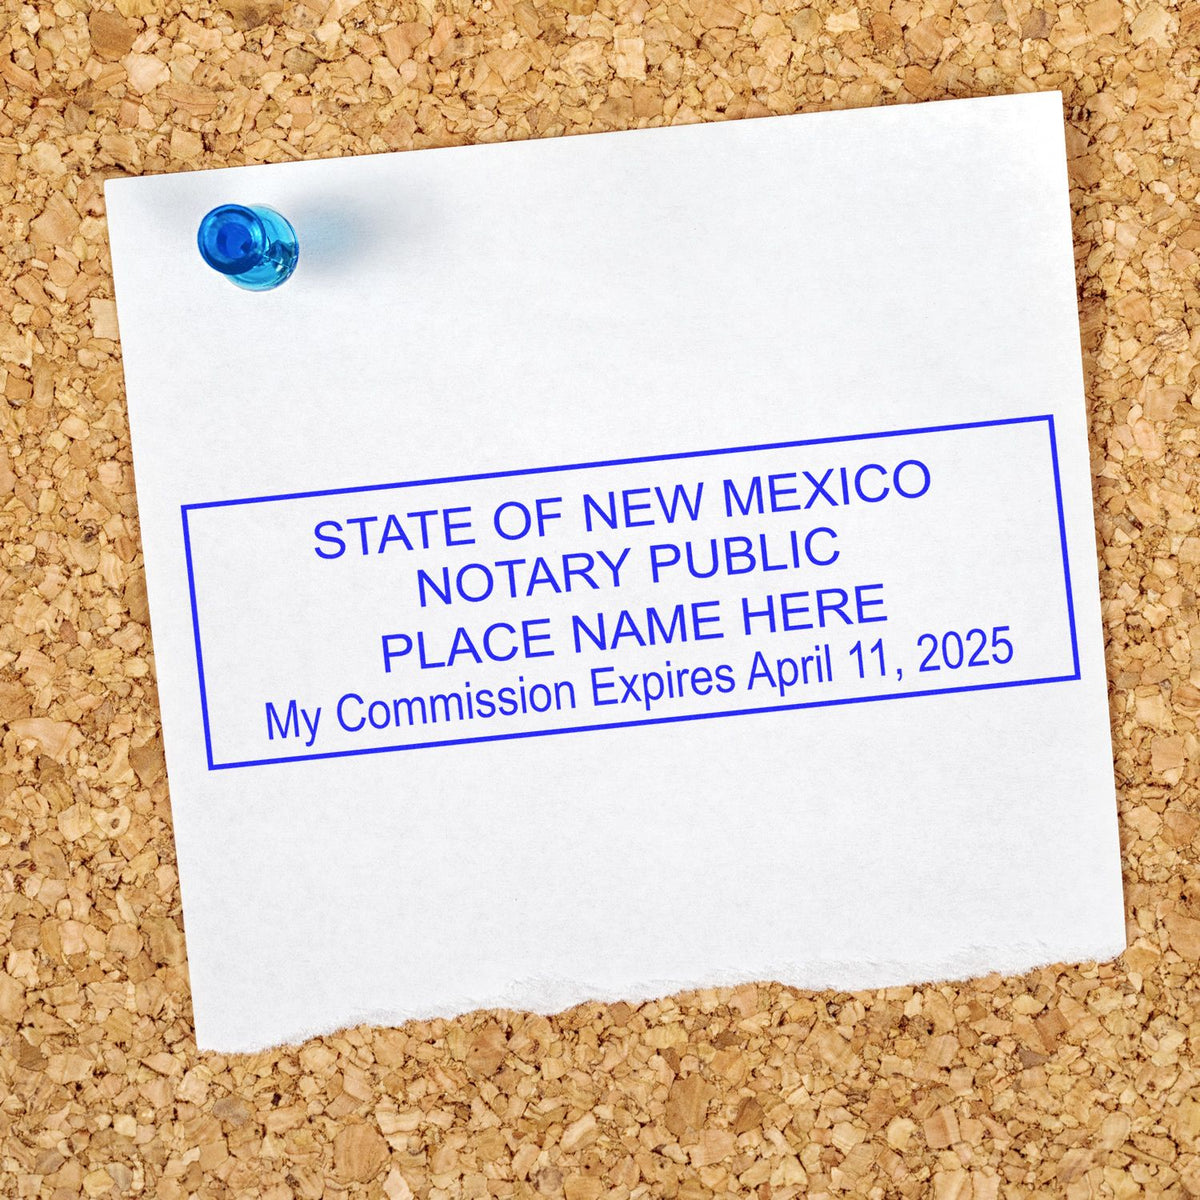 Slim Pre-Inked State Seal Notary Stamp for New Mexico in use photo showing a stamped imprint of the Slim Pre-Inked State Seal Notary Stamp for New Mexico